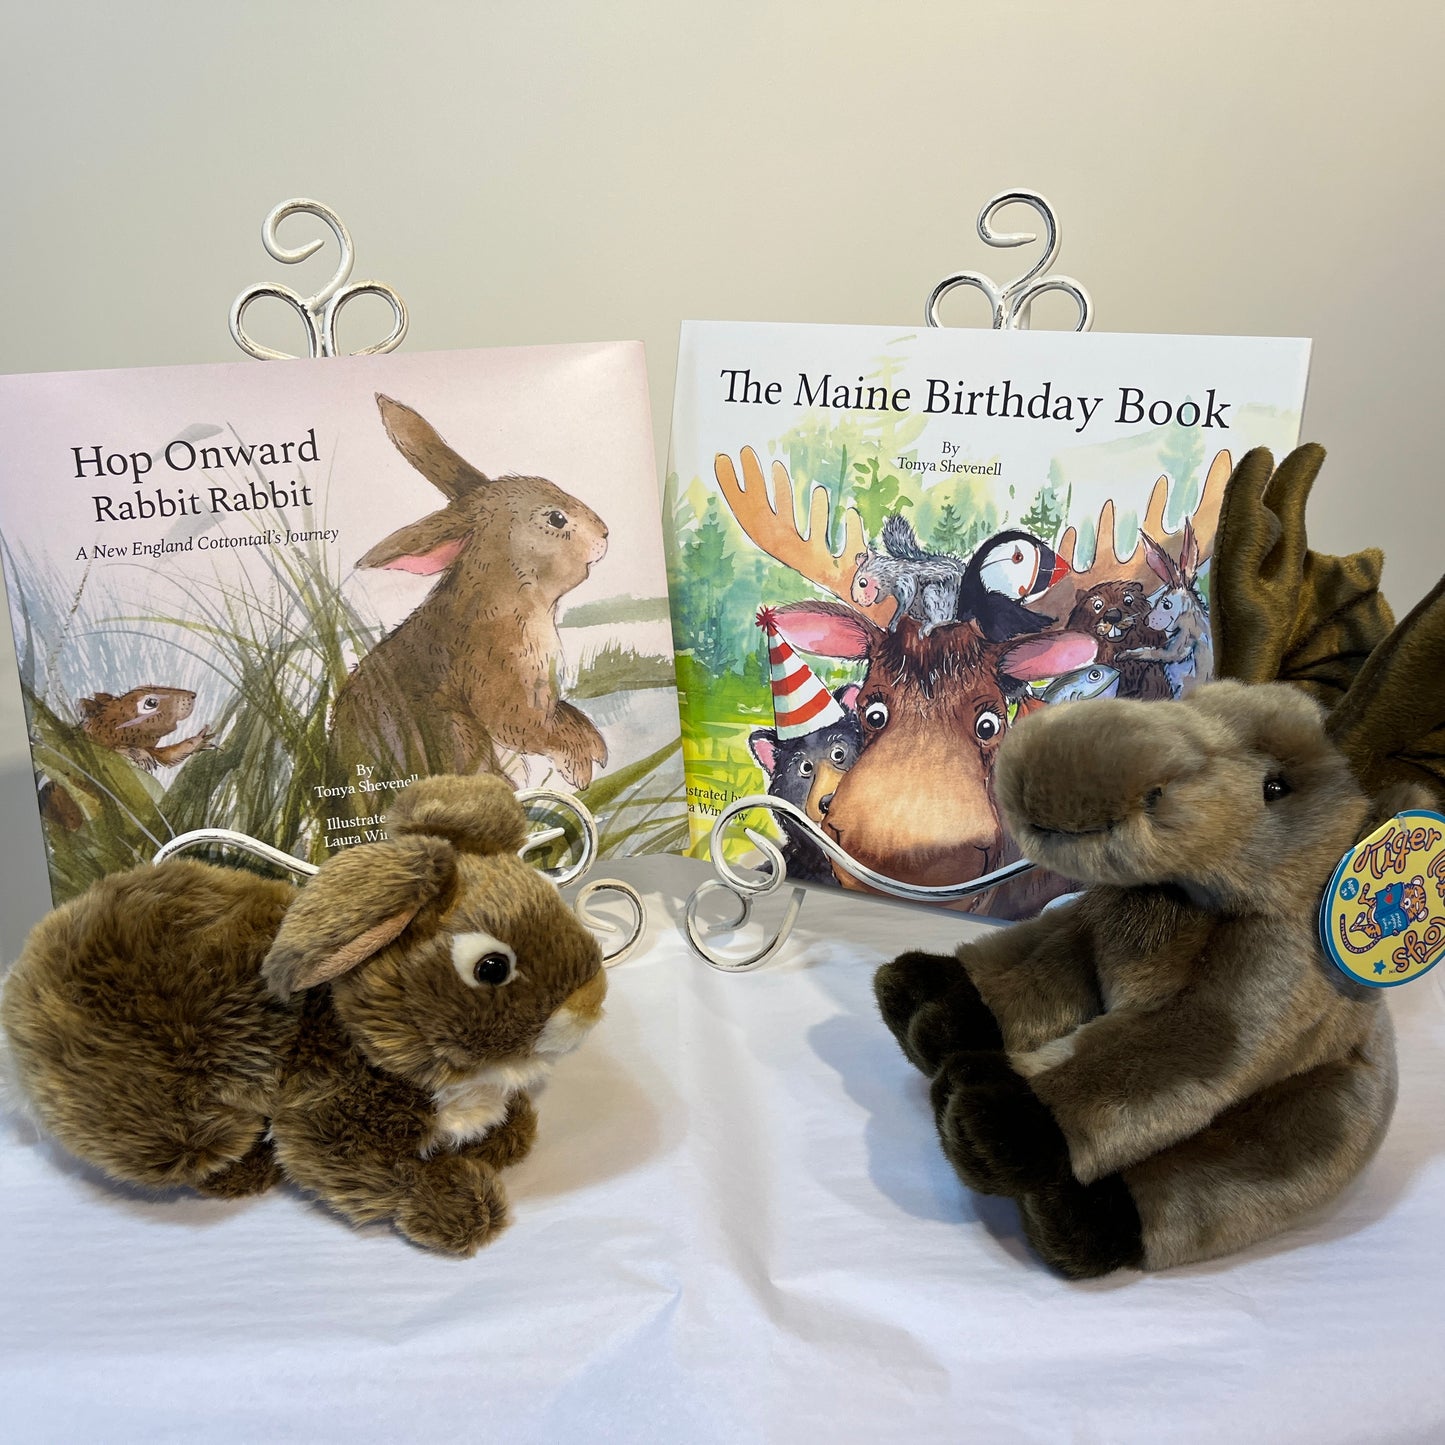 The new book and bunny (cottontail) bundle! Hop Onward Rabbit Rabbit: A New England Cottontail's Journey